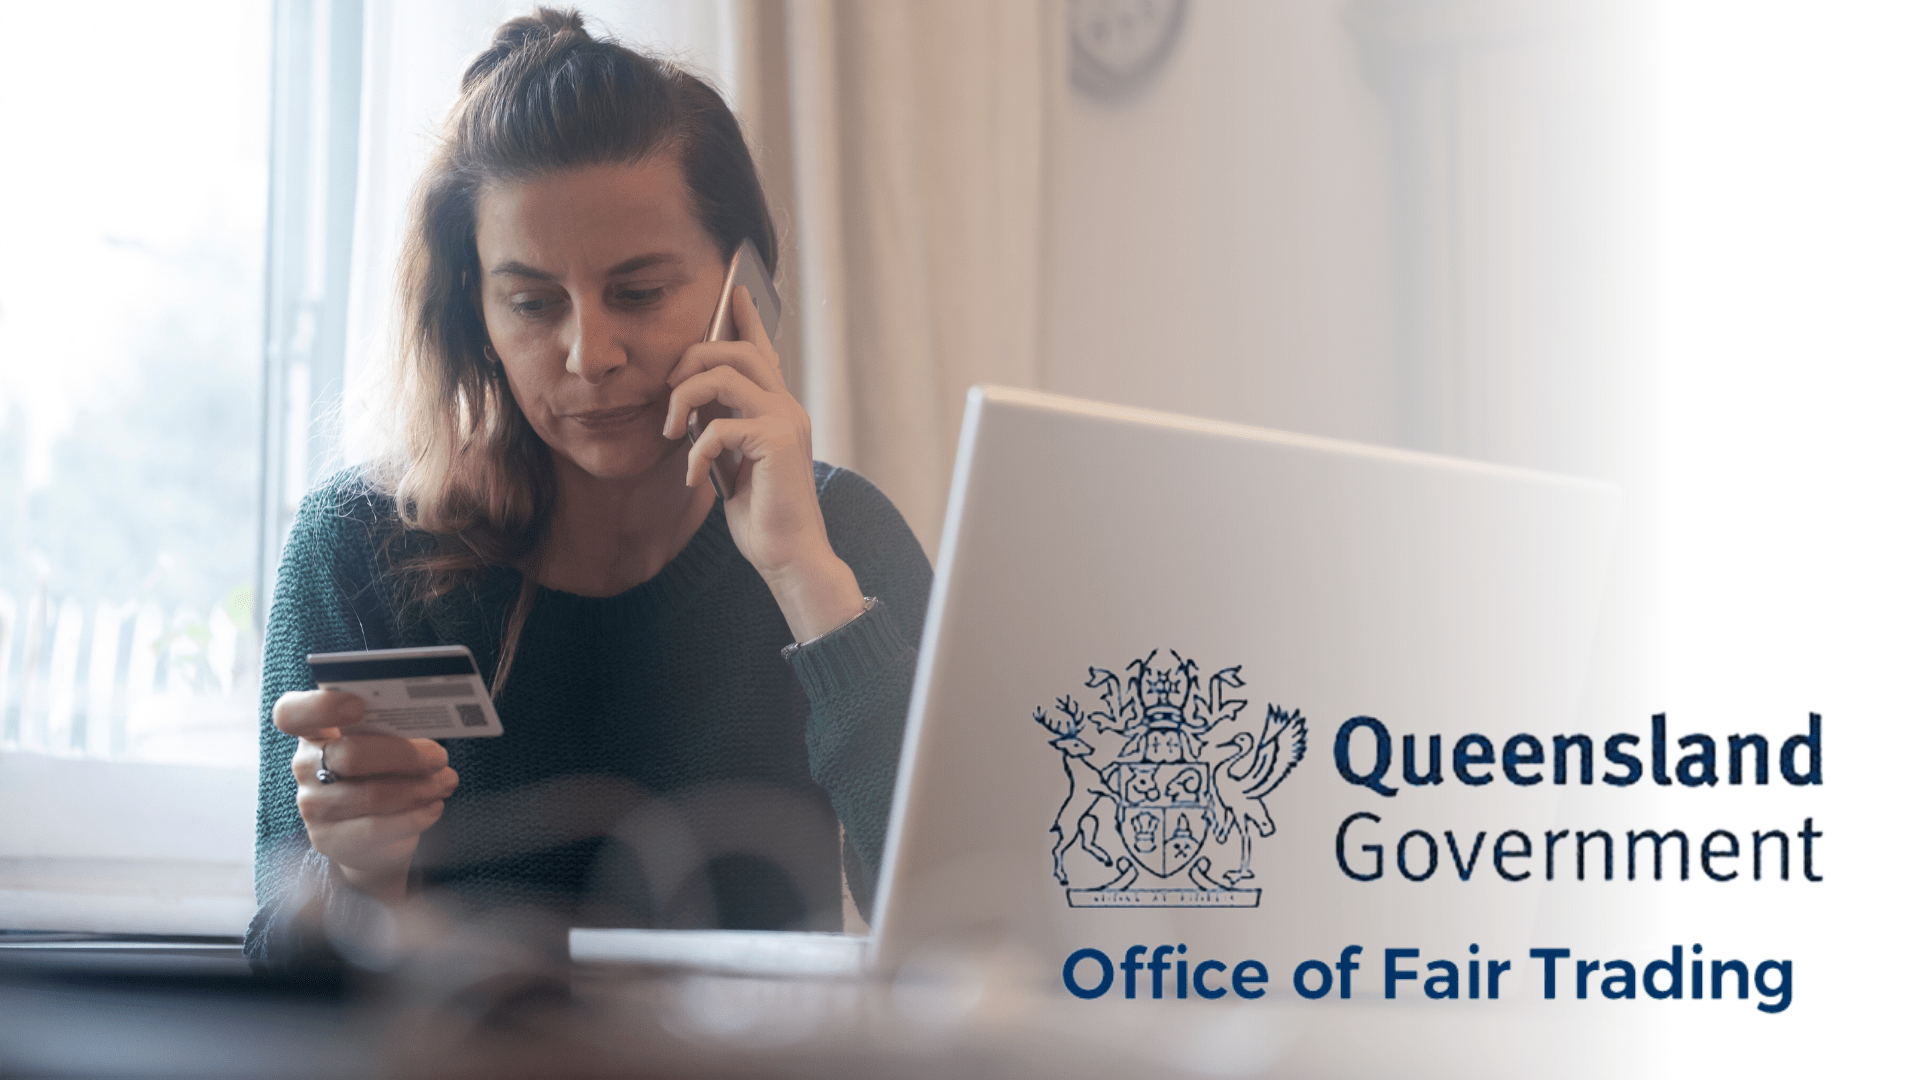 The Office of Fair Trading_ Scam awareness